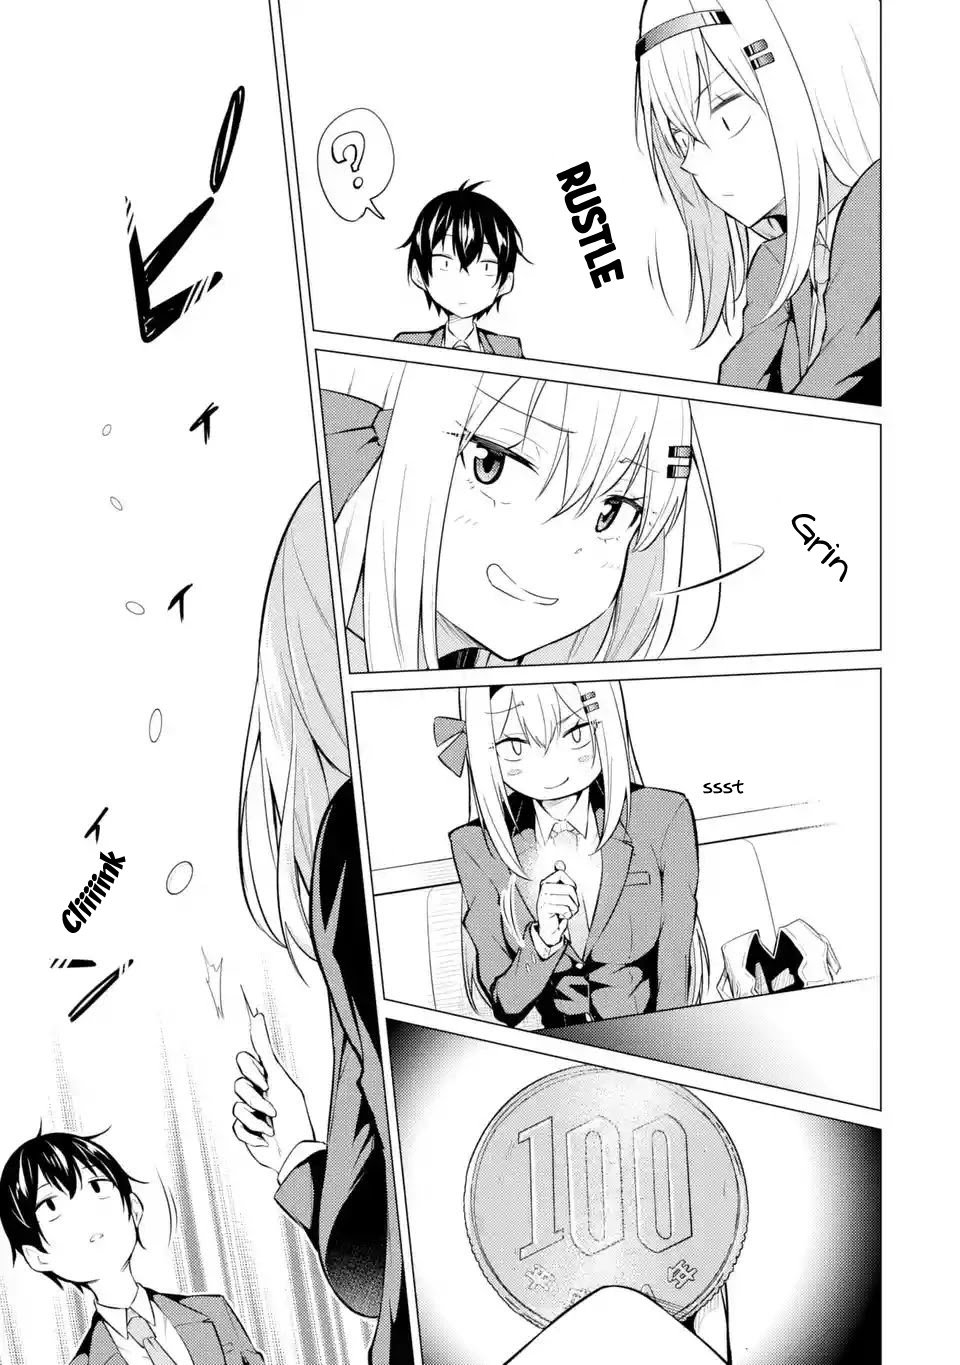 Relentlessly Approaching The Poison-Tongued And Indifferent Beauty To Tickle The Cutesy Reactions Out Of Her - chapter 2 - #6